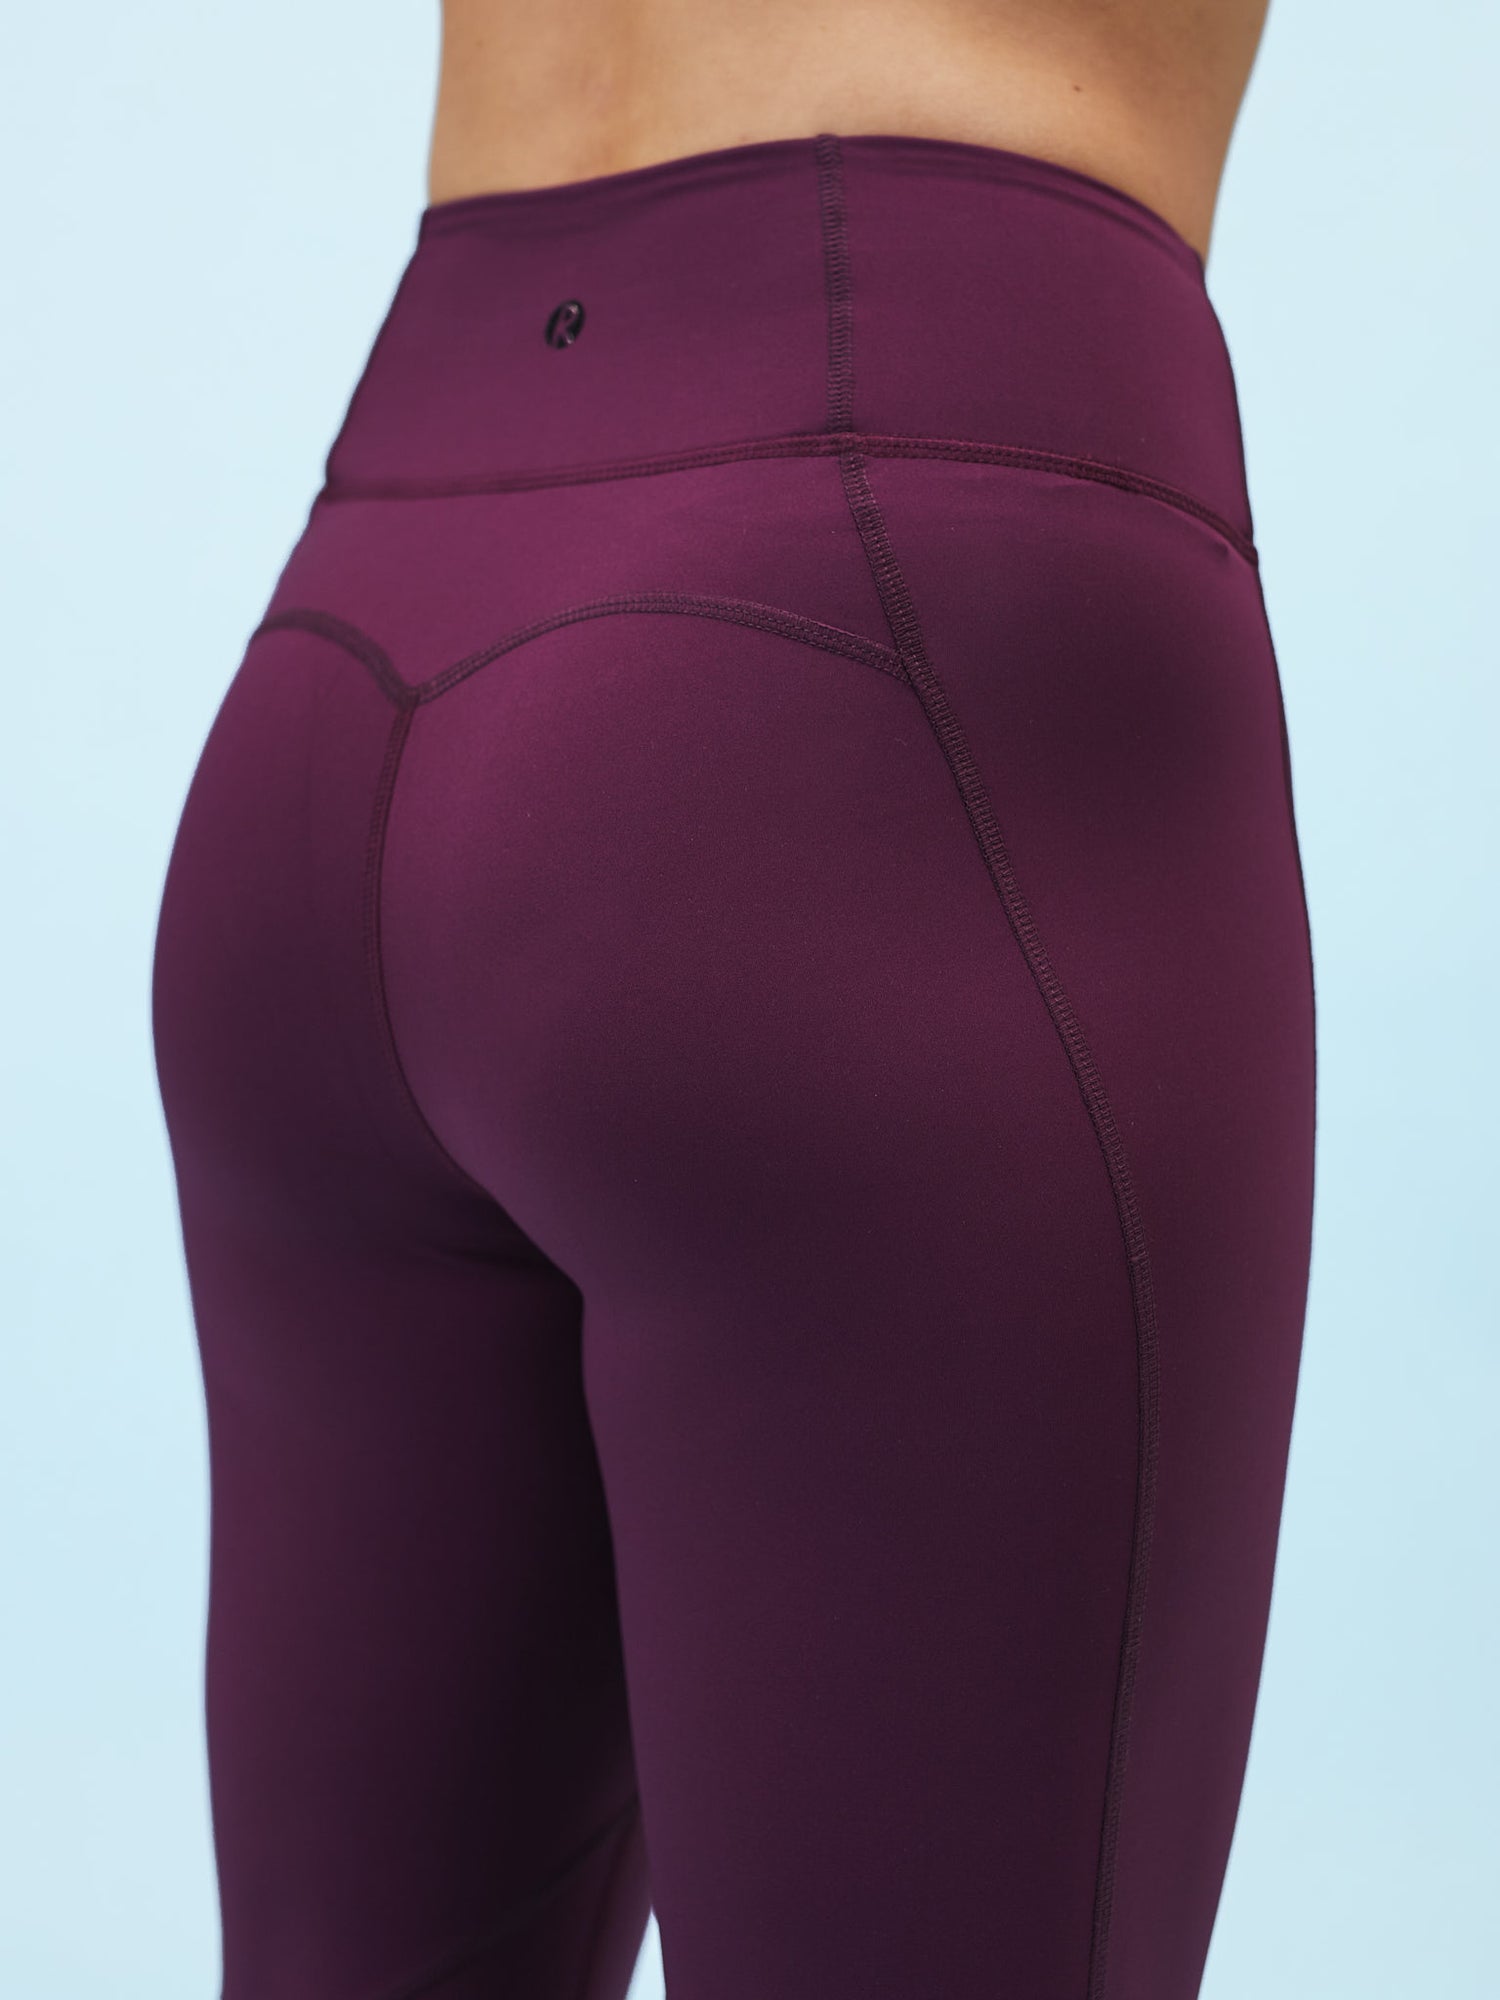 Capri Leggings With Pockets for Women Non See Through Compression Pants  Purple XL 